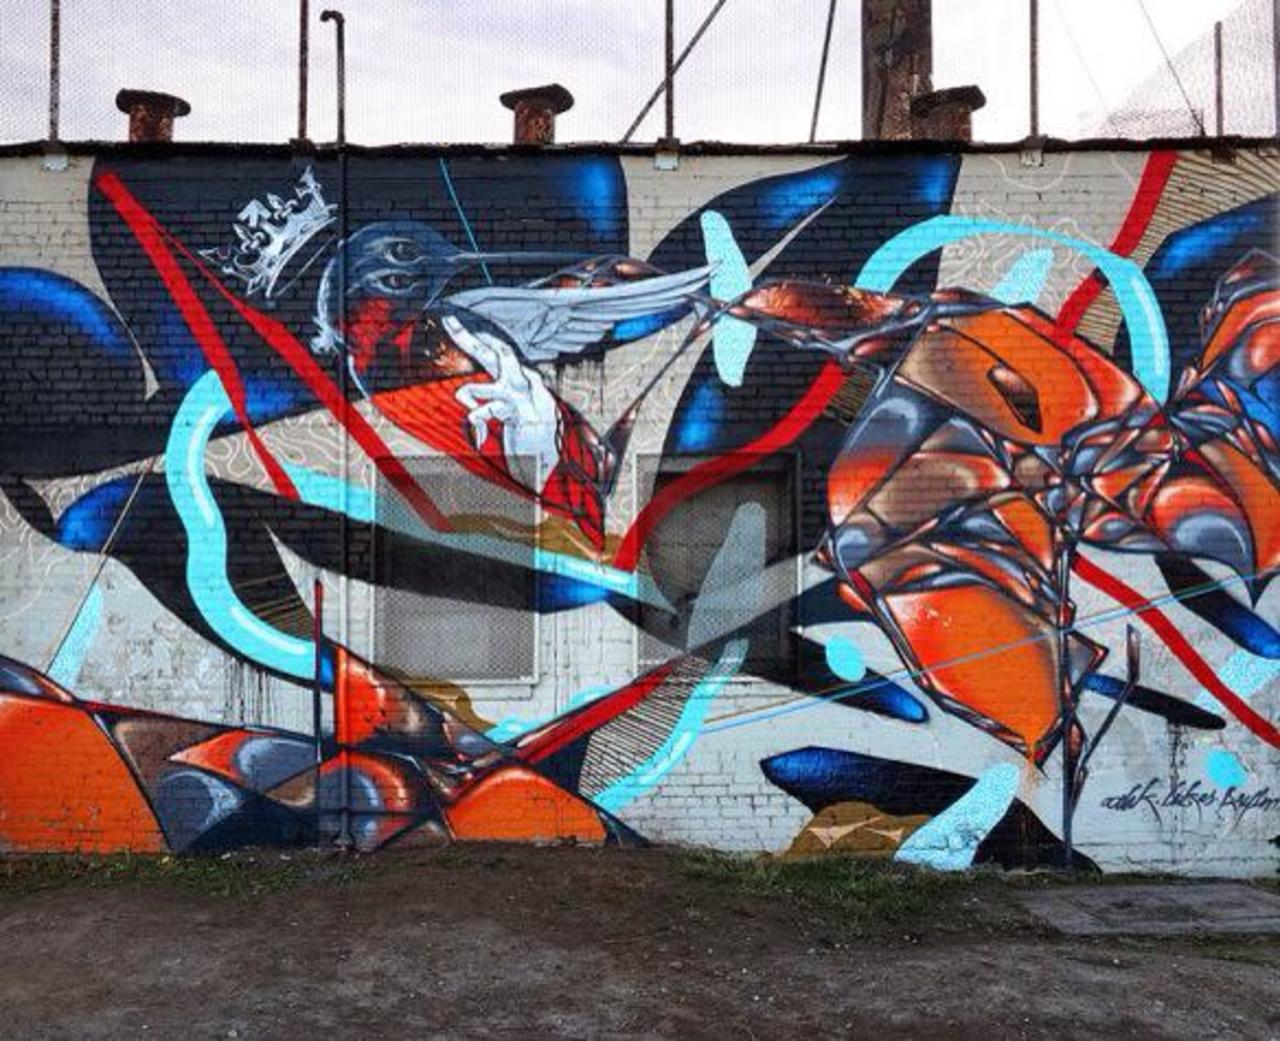 Eclectic abstract #mural by #graffiti artists Codak, Likes & Asylm in Mural in Los Angeles.

http://wp.me/p2dpFM-2yy http://t.co/tSeIVIkF8R